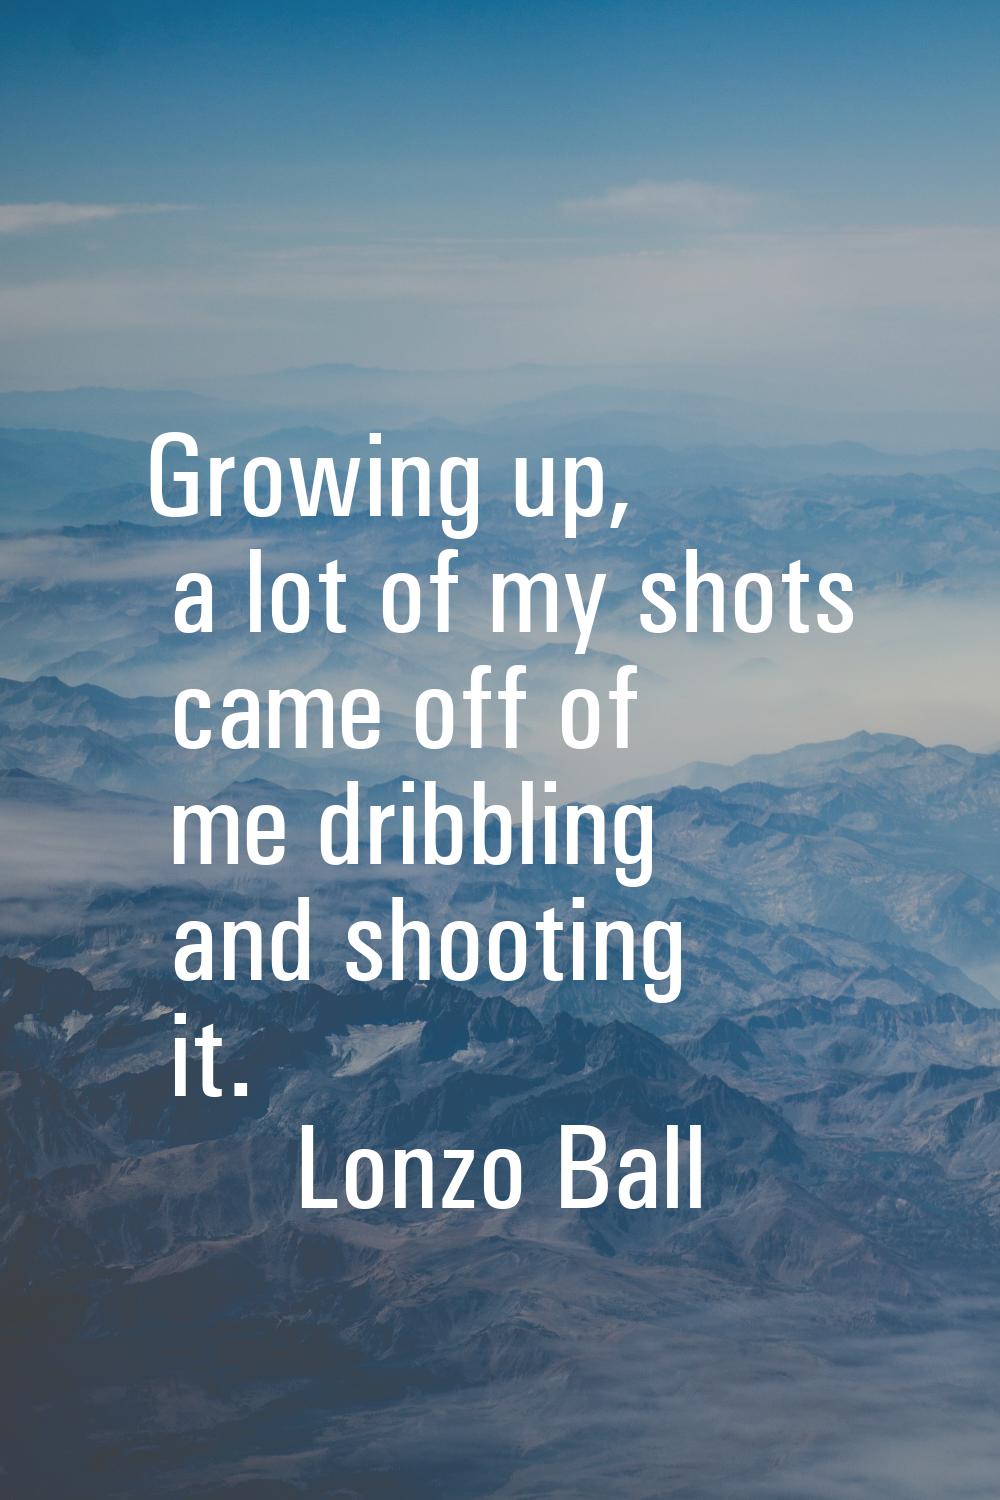 Growing up, a lot of my shots came off of me dribbling and shooting it.